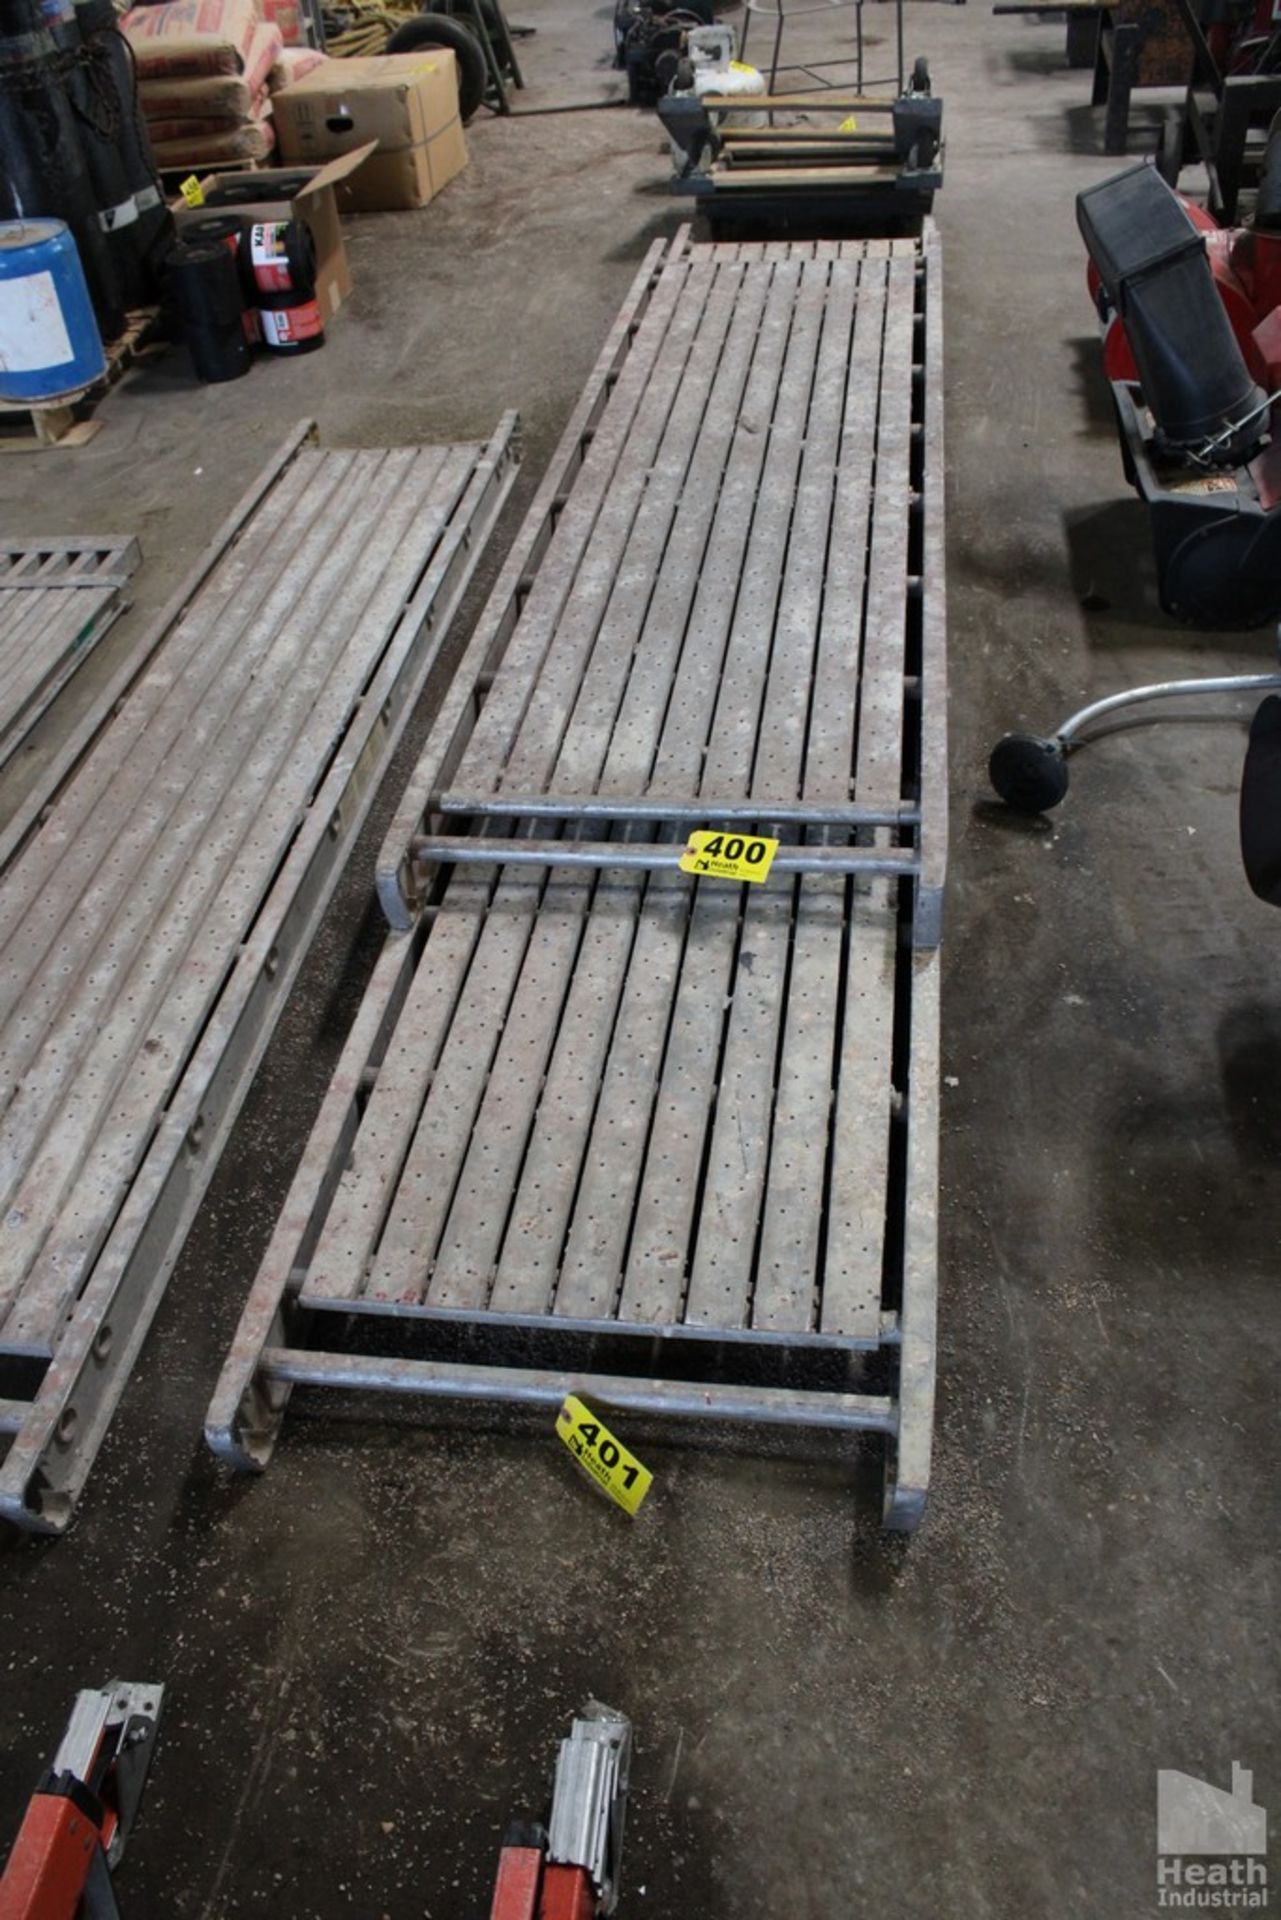 SECTION OF WERNER ALUMINUM SCAFFOLDING, 27" WIDE, 12FT. LONG